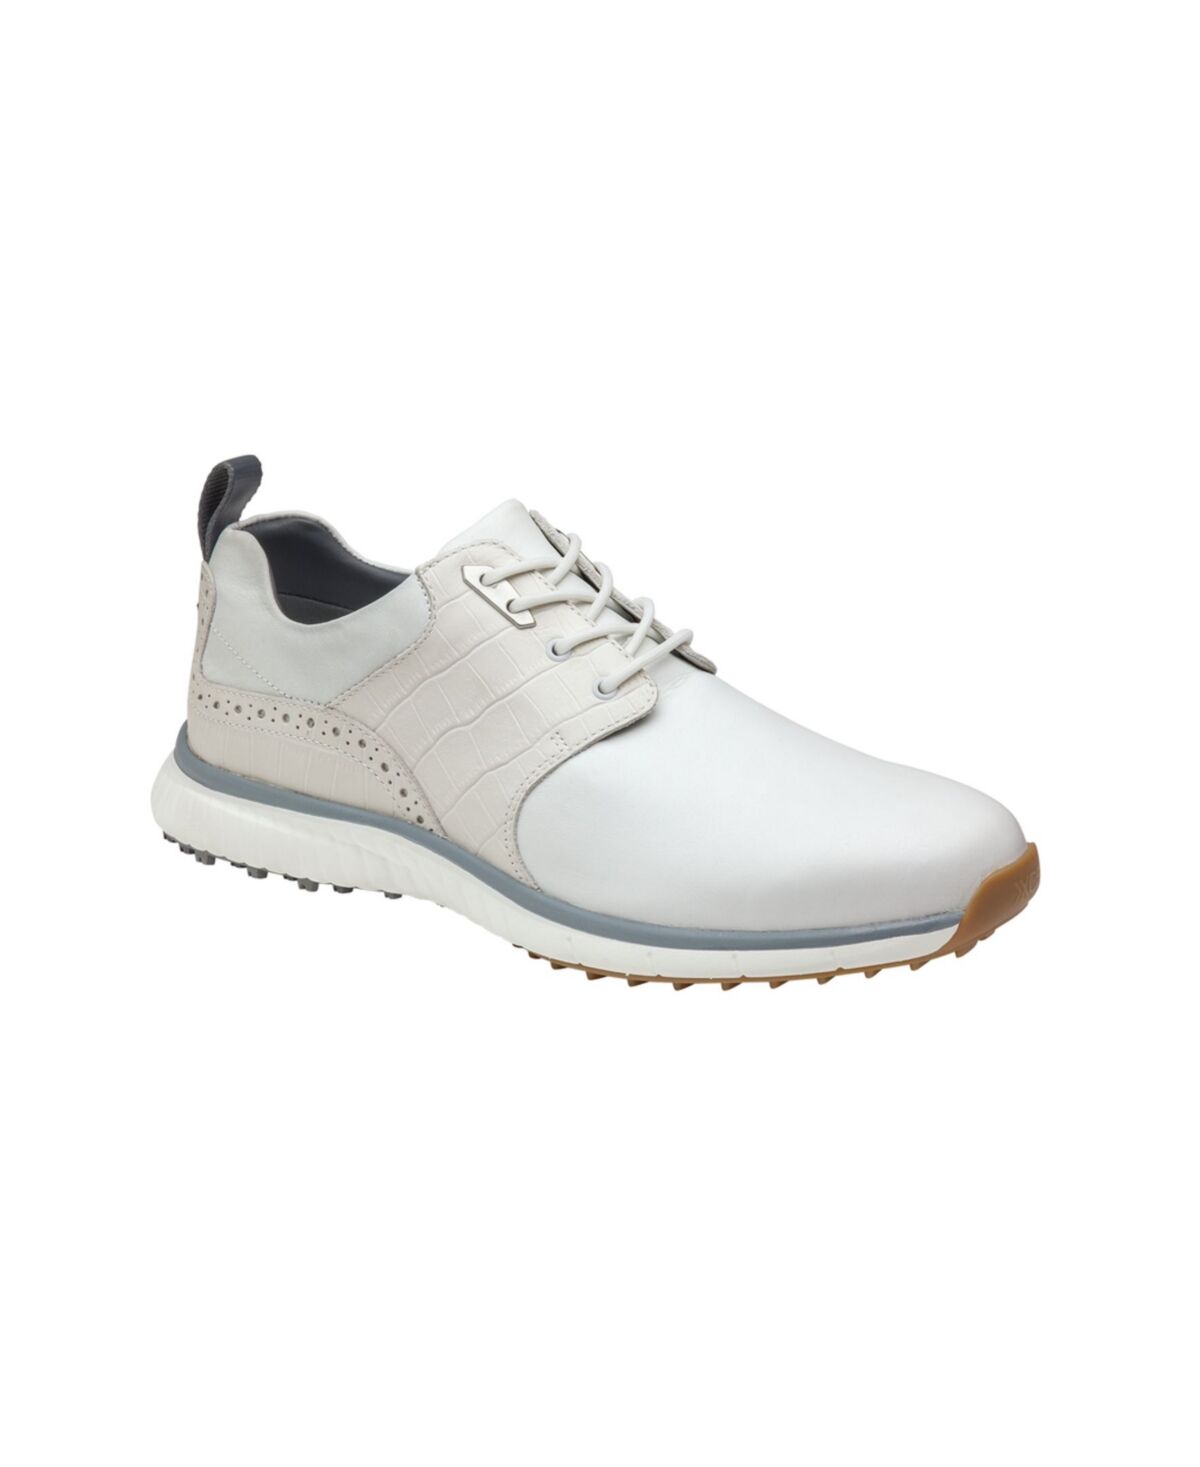 Johnston & Murphy Men's XC4 Water-resistant H2 Luxe Hybrid Saddle Golf Shoes - White/White Croc